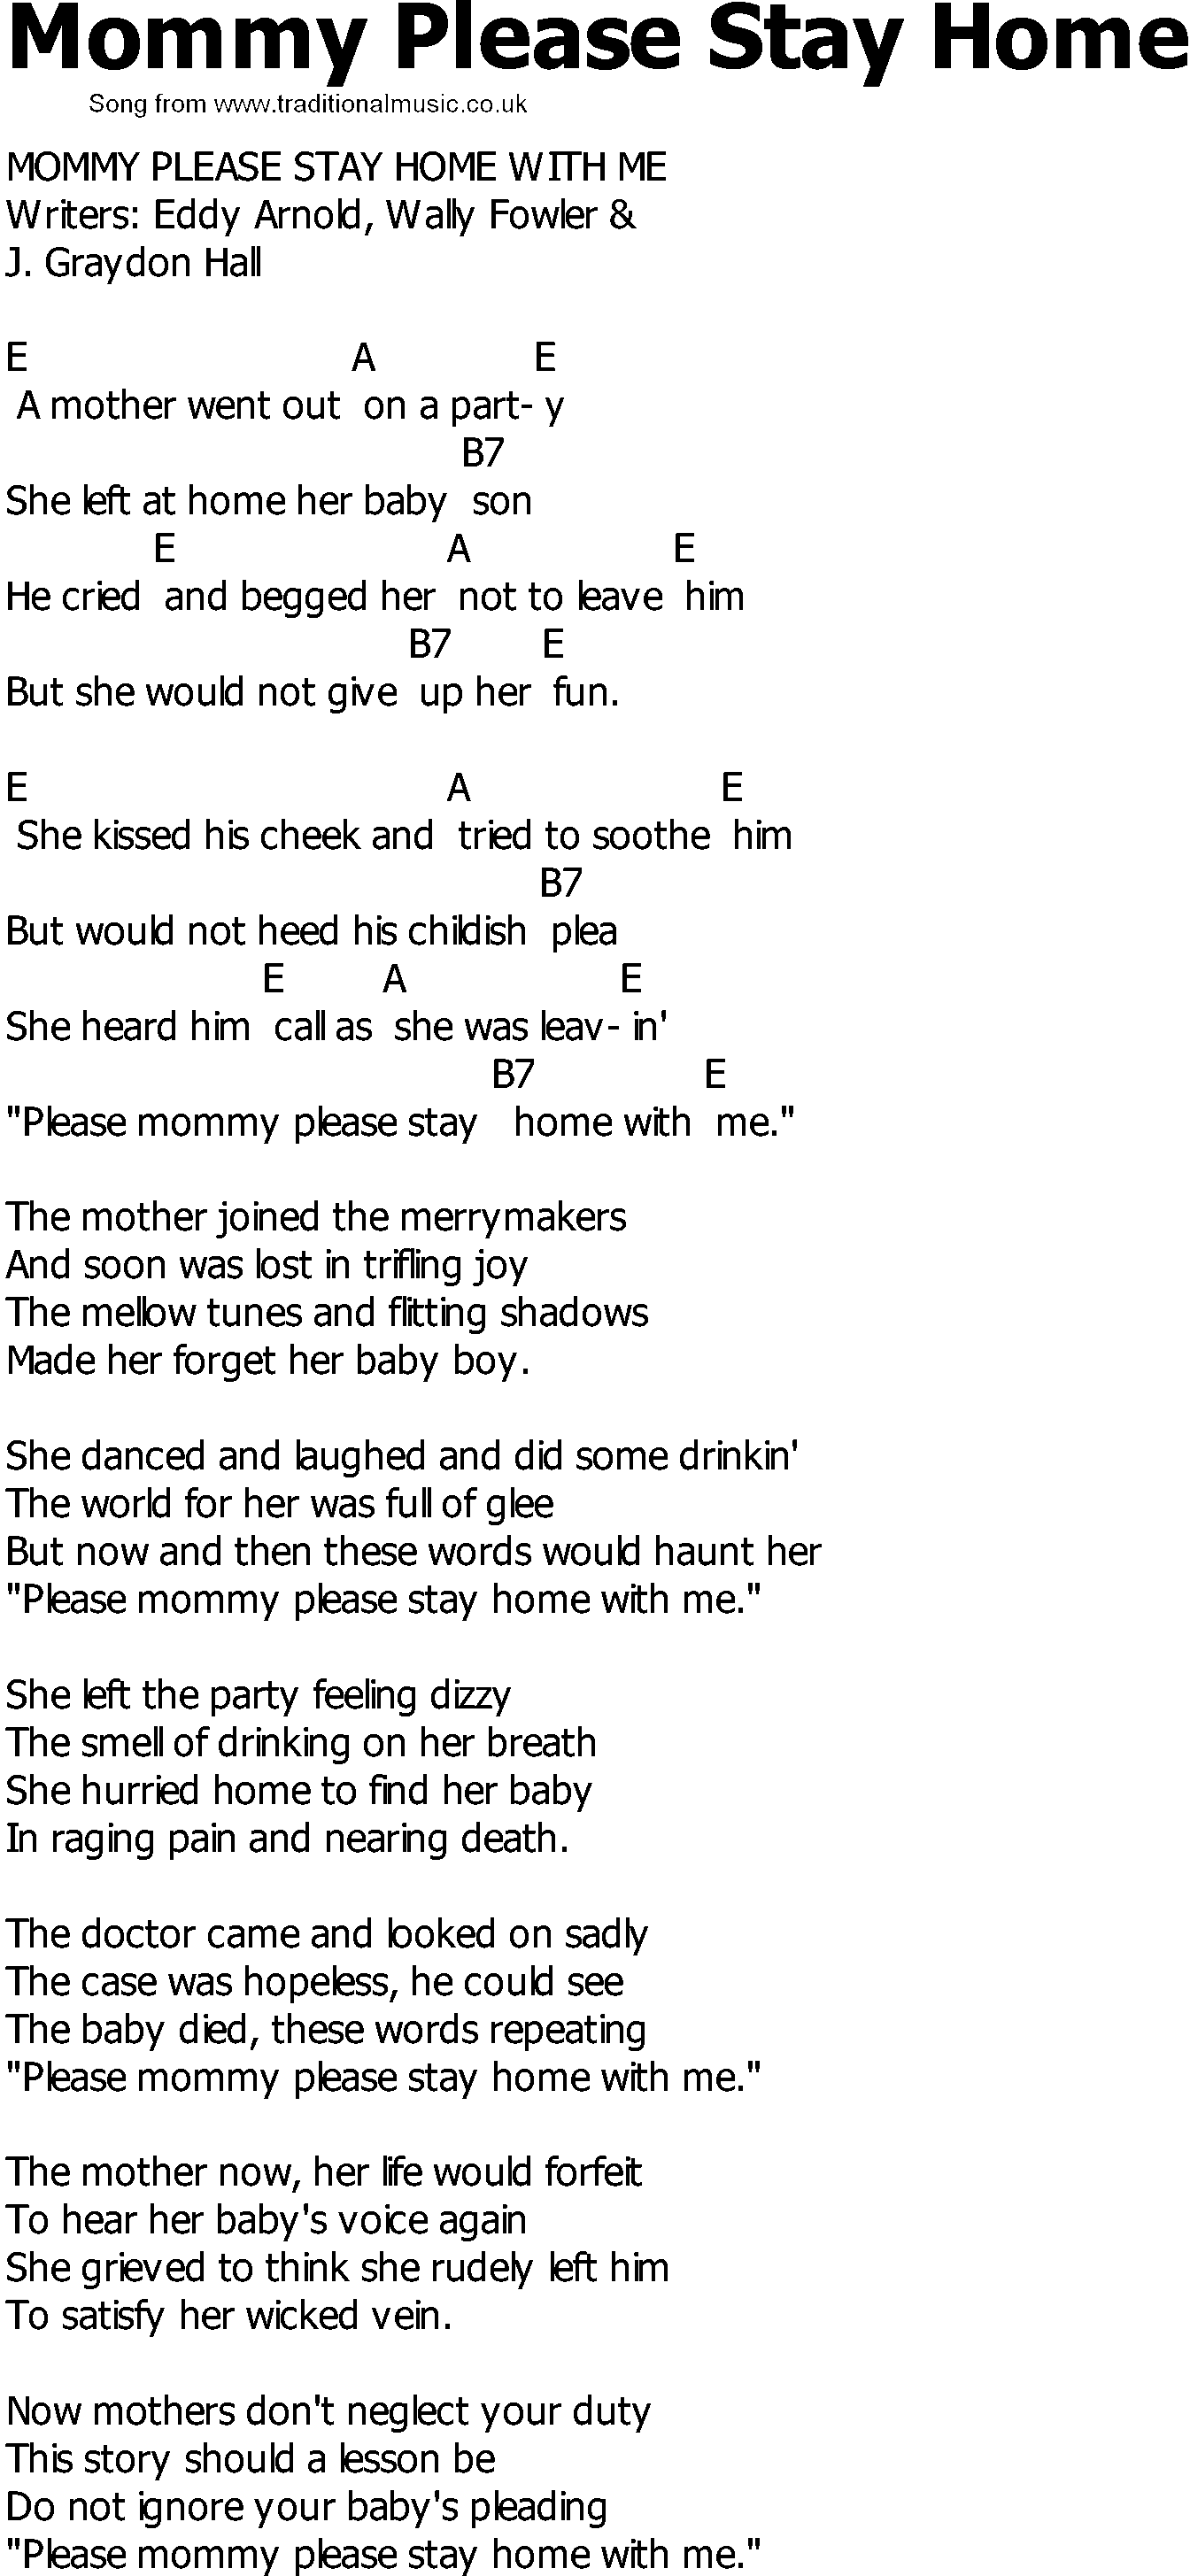 Old Country song lyrics with chords - Mommy Please Stay Home